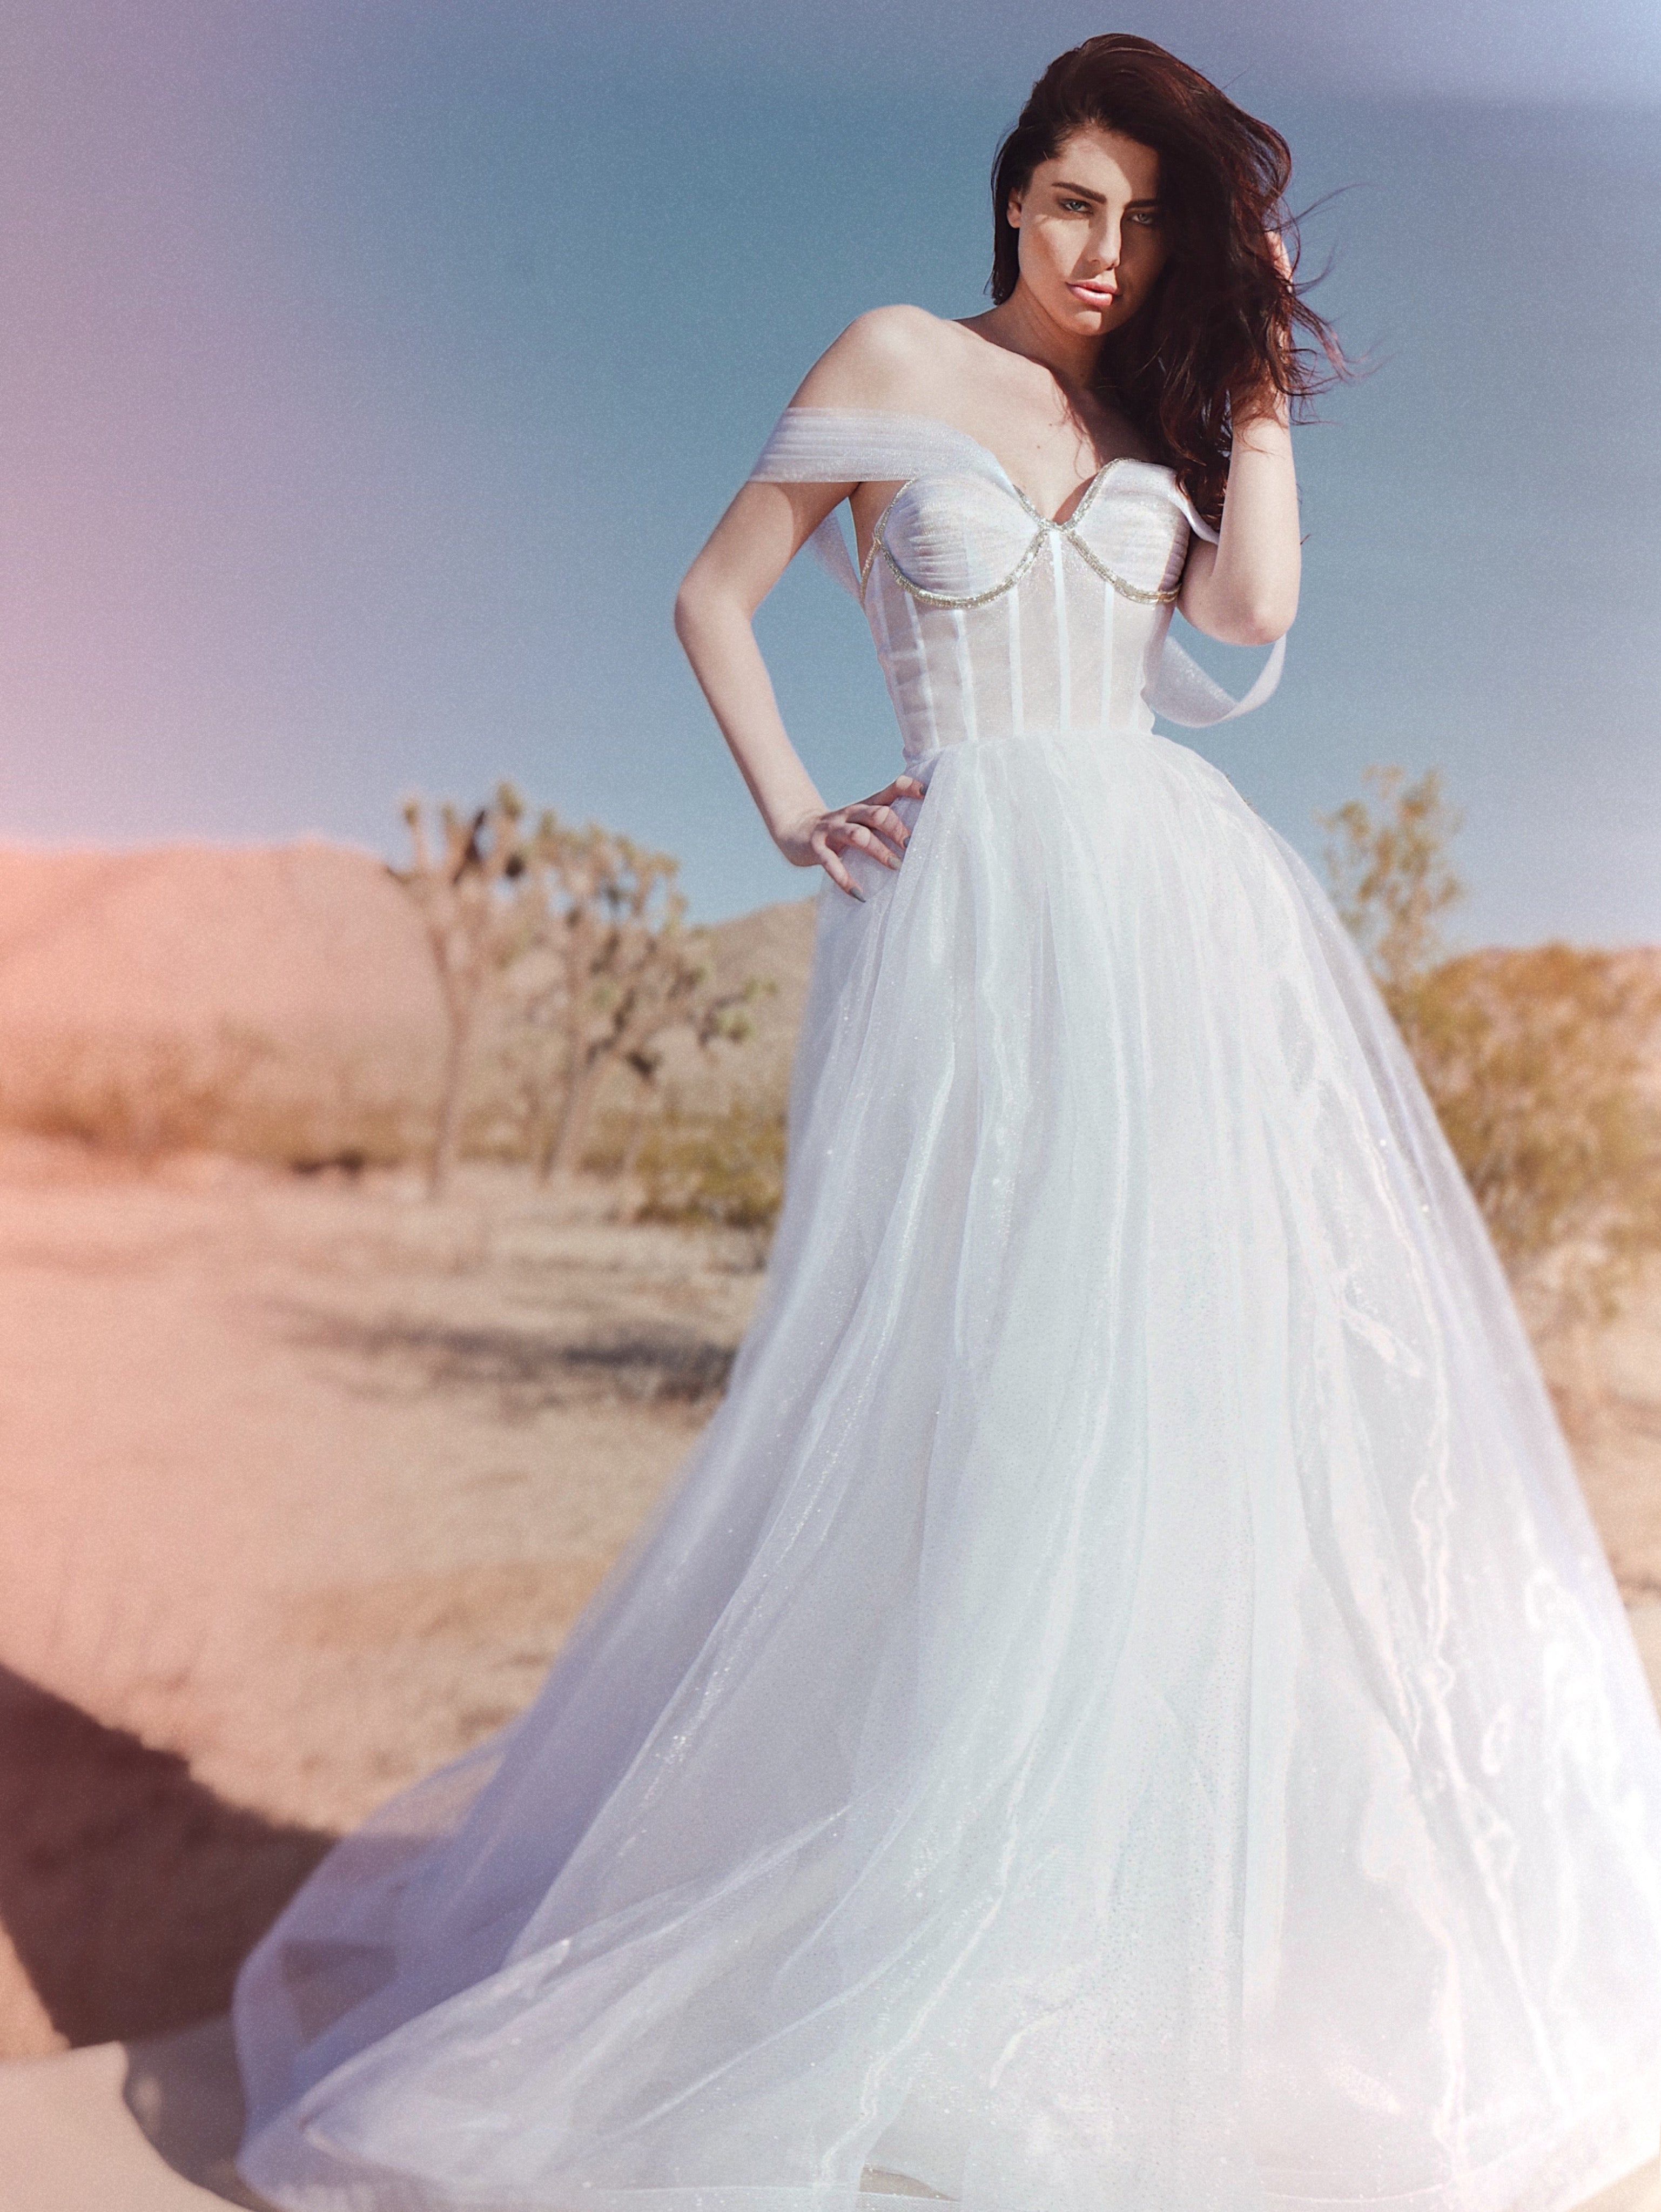 Glitter tulle wedding dress with off the shoulder straps shot in Joshua Tree